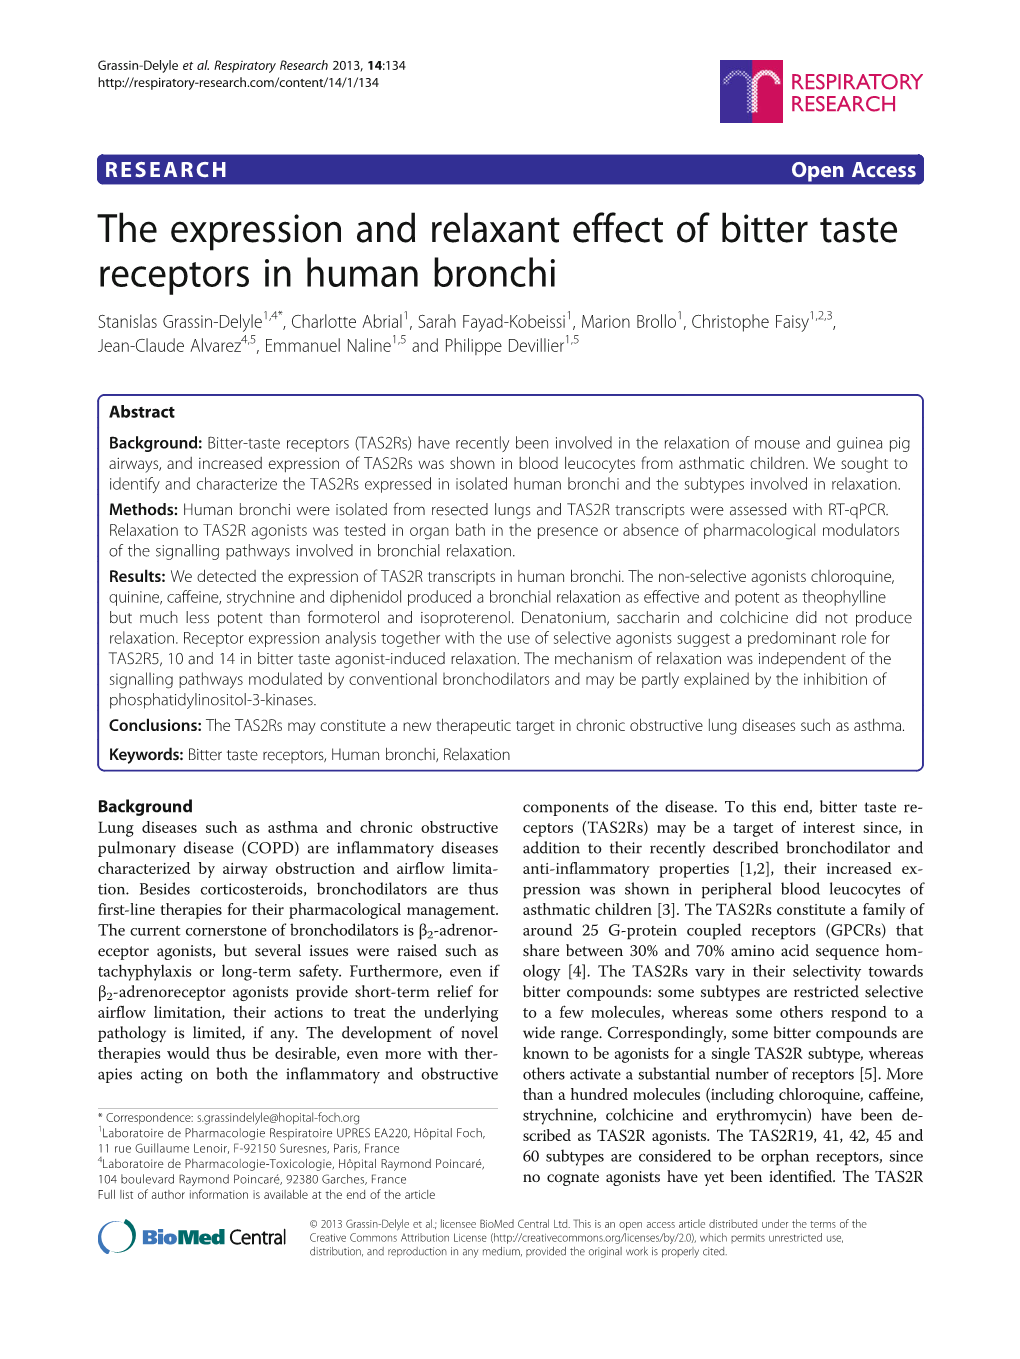 The Expression and Relaxant Effect of Bitter Taste Receptors in Human